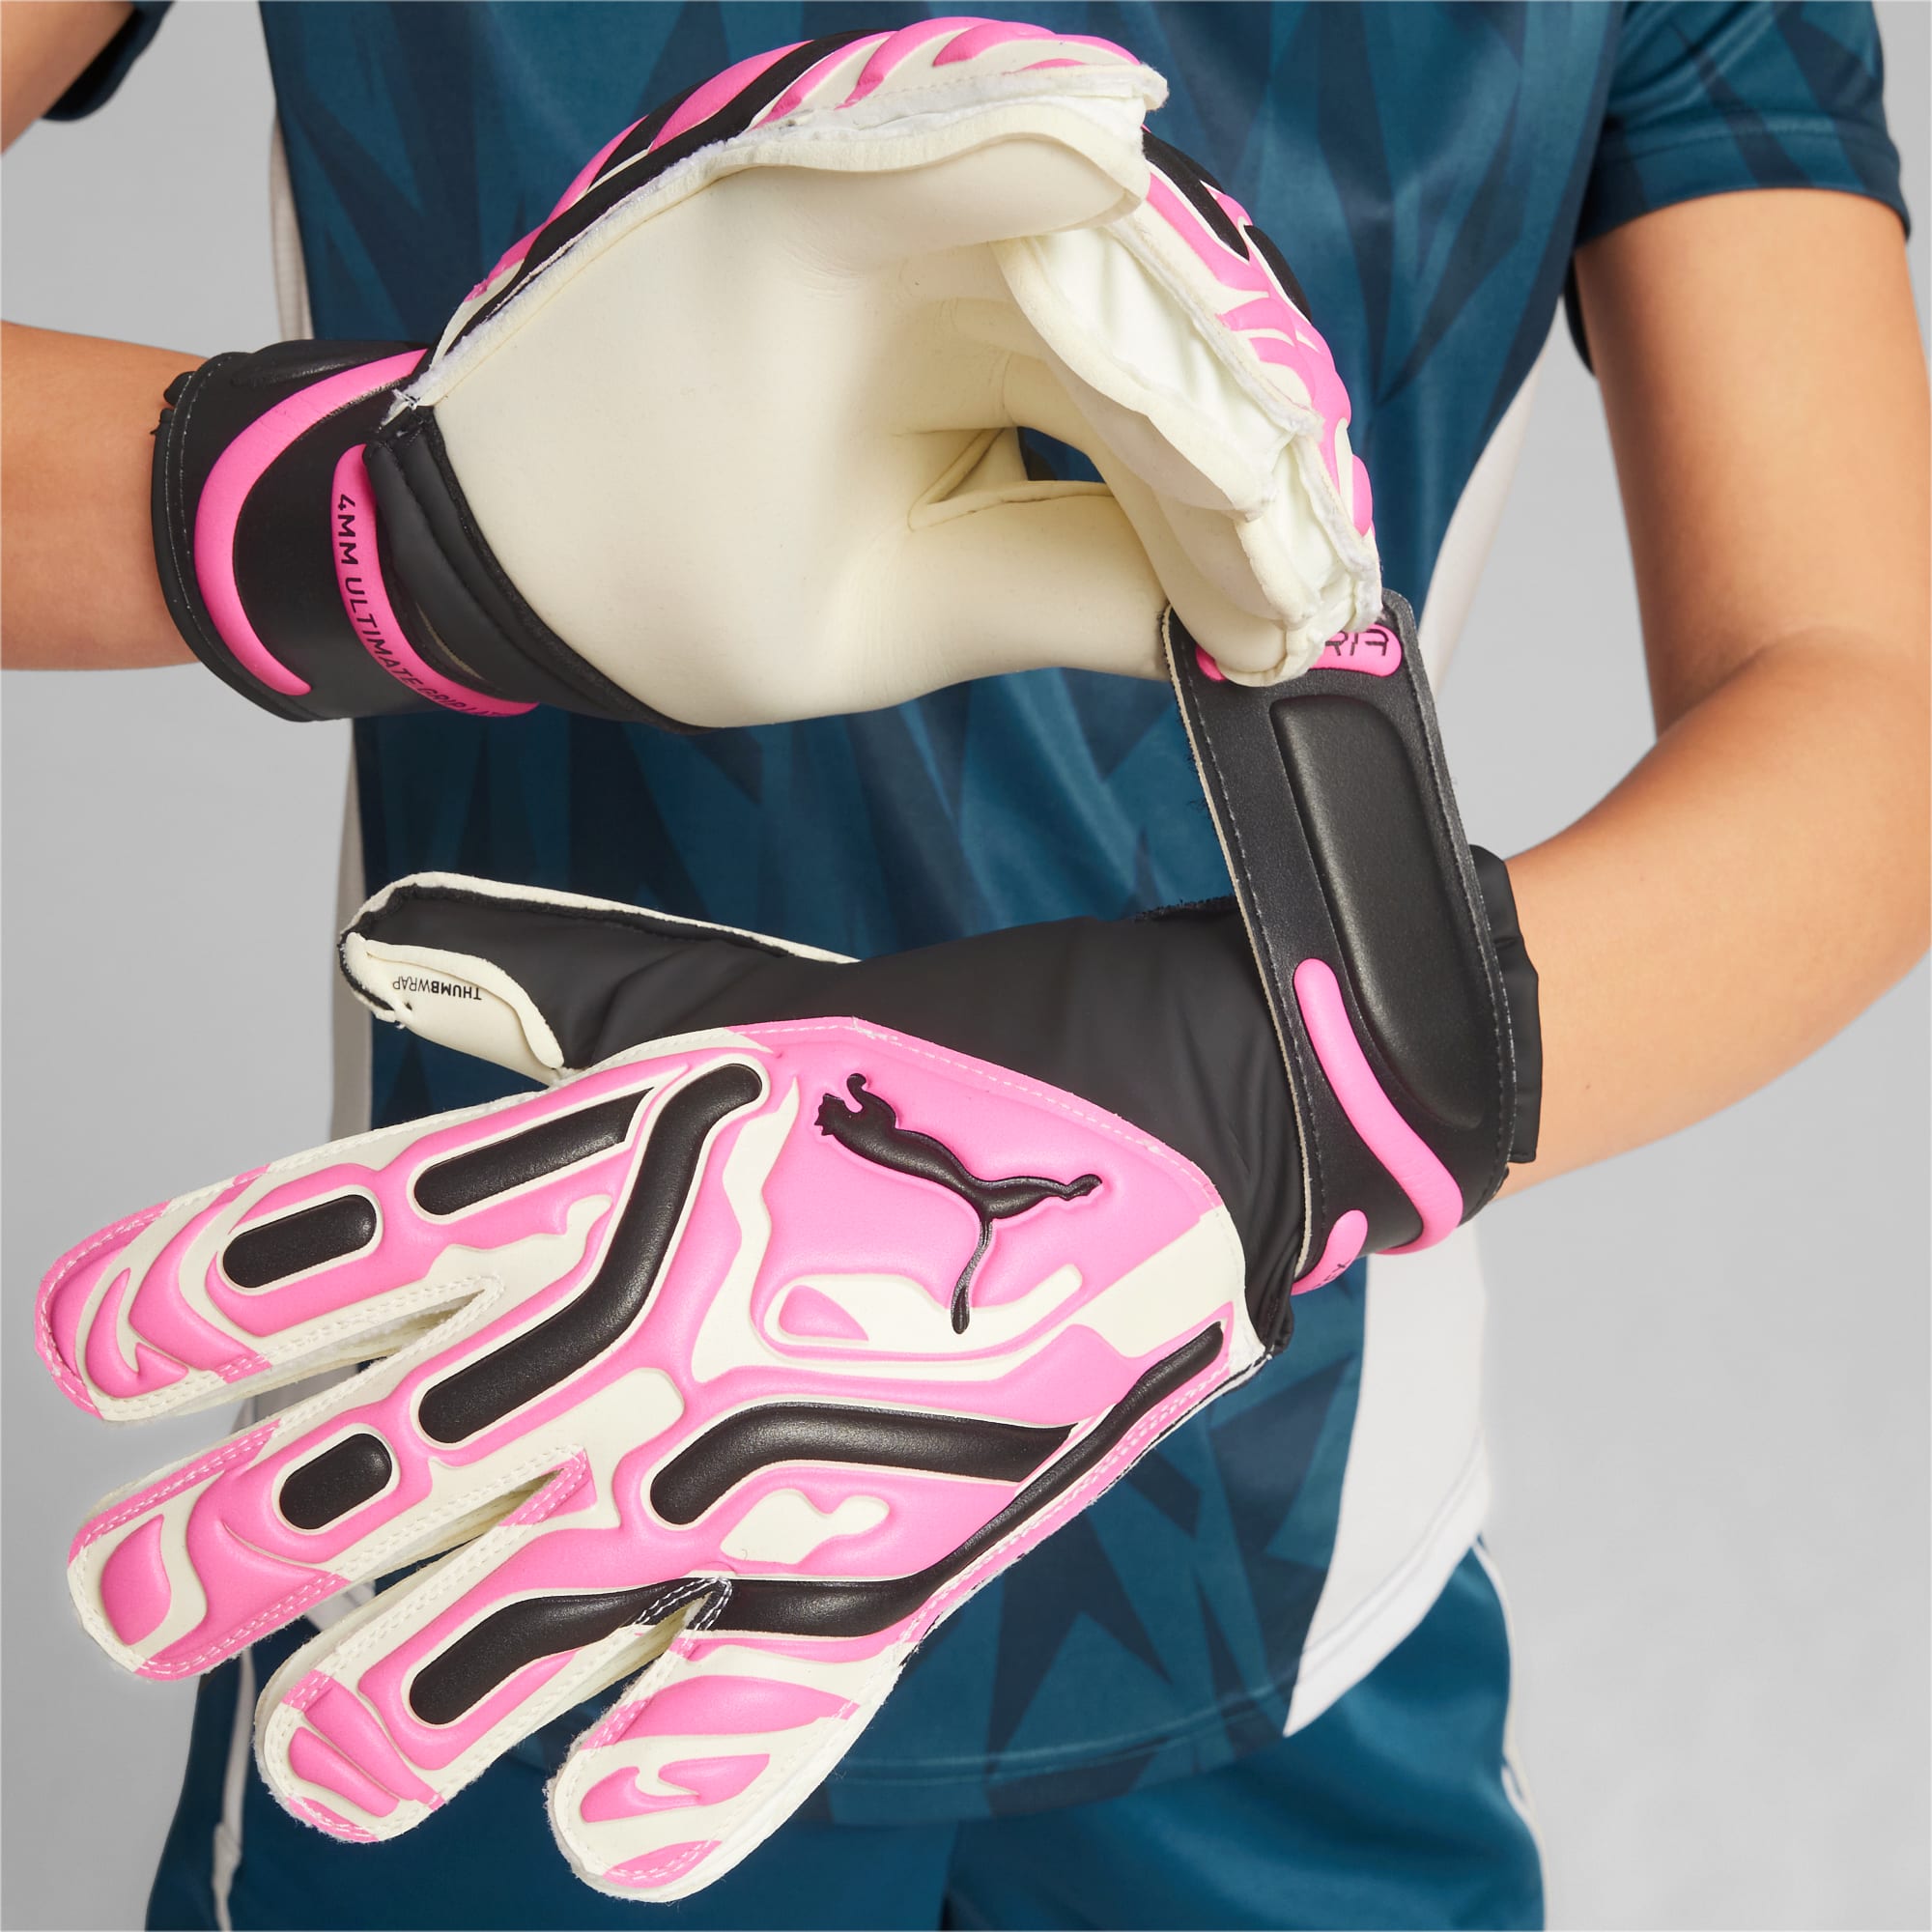 PUMA Ultra Match Protect Youth Goalkeeper Gloves, Poison Pink/White/Black, Size 5, Accessories